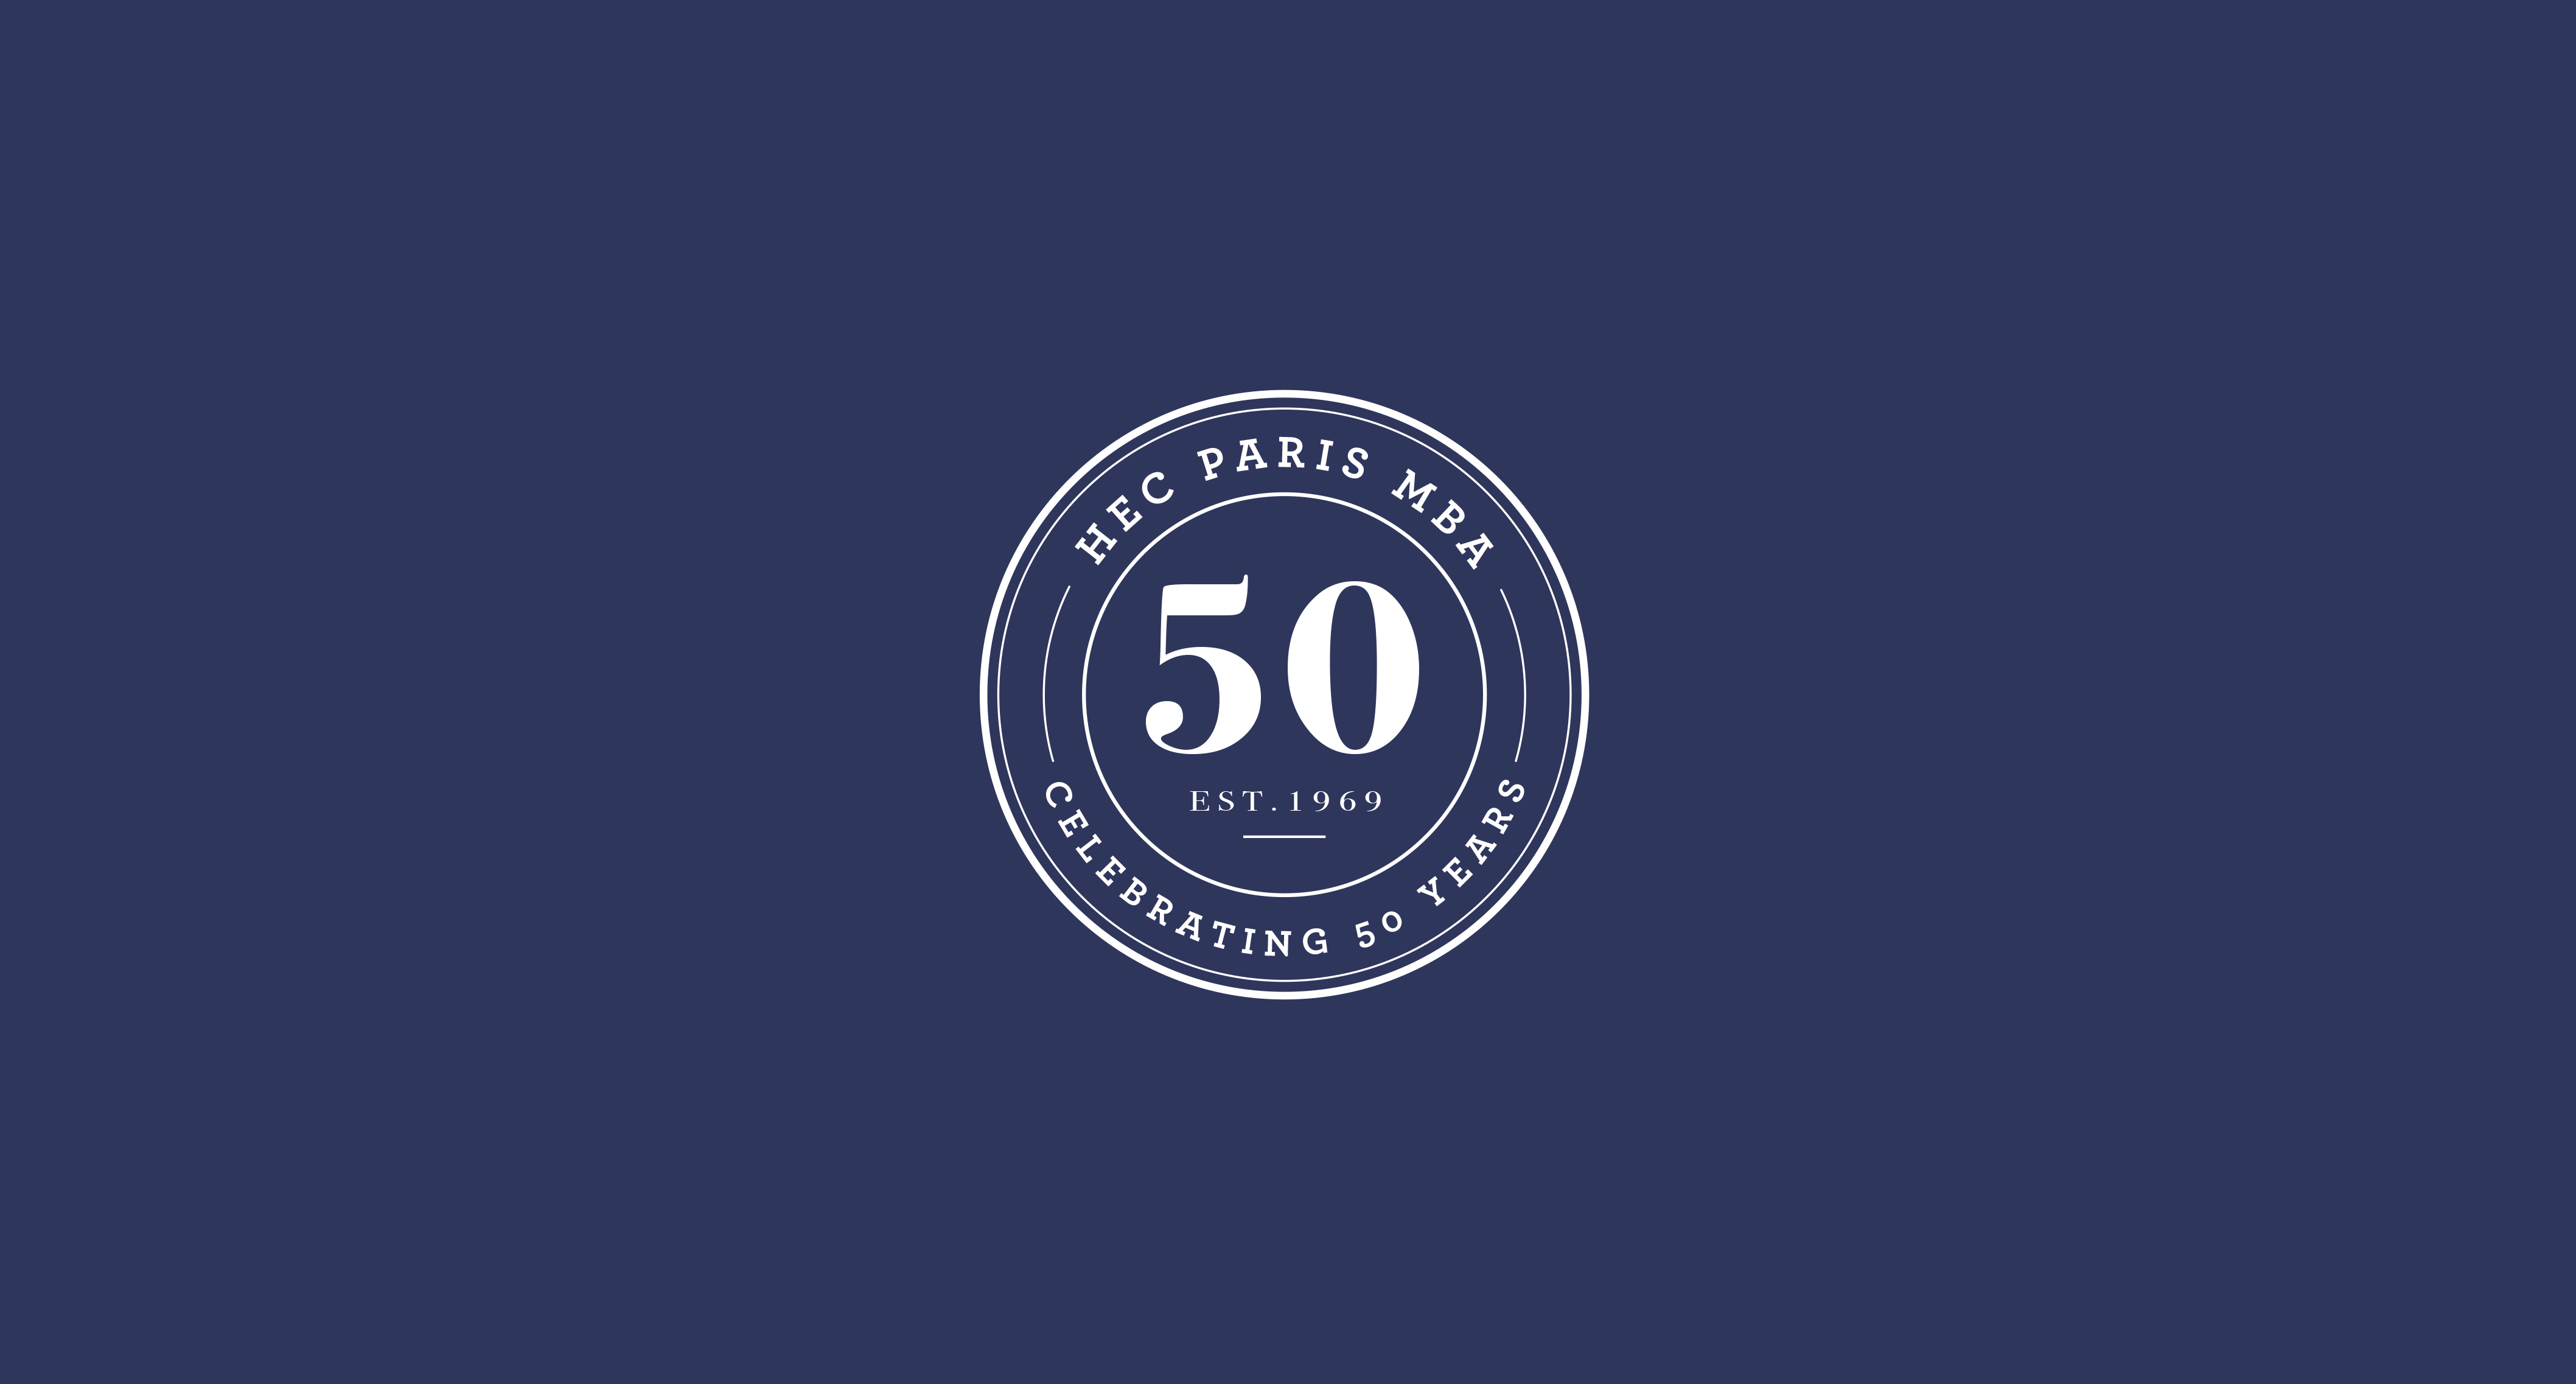 1969-2019: The HEC Paris MBA Celebrates its First 50 Years